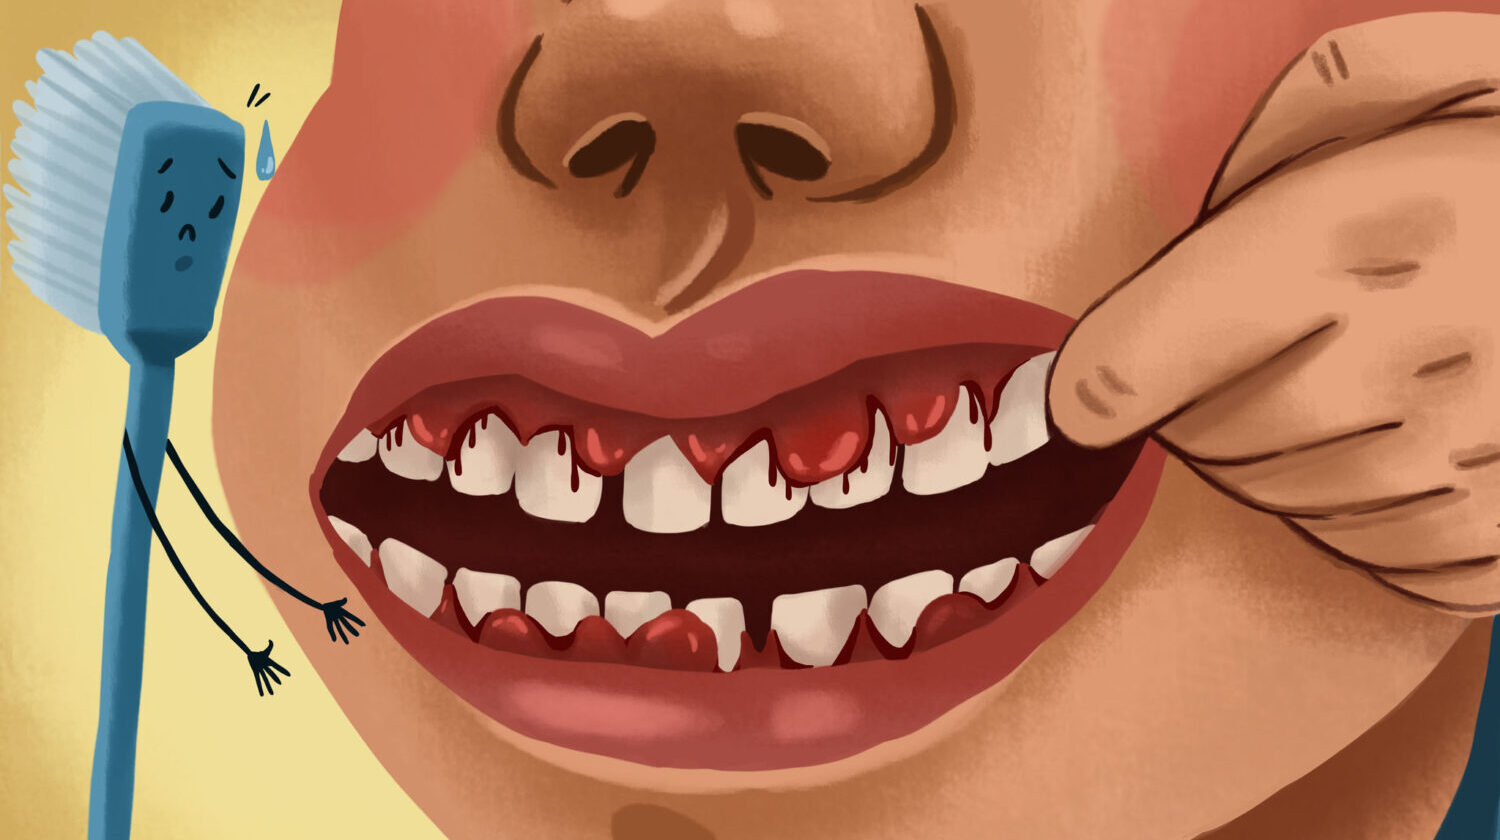 Illustration of a mouth with bleeding gums due to gum disease